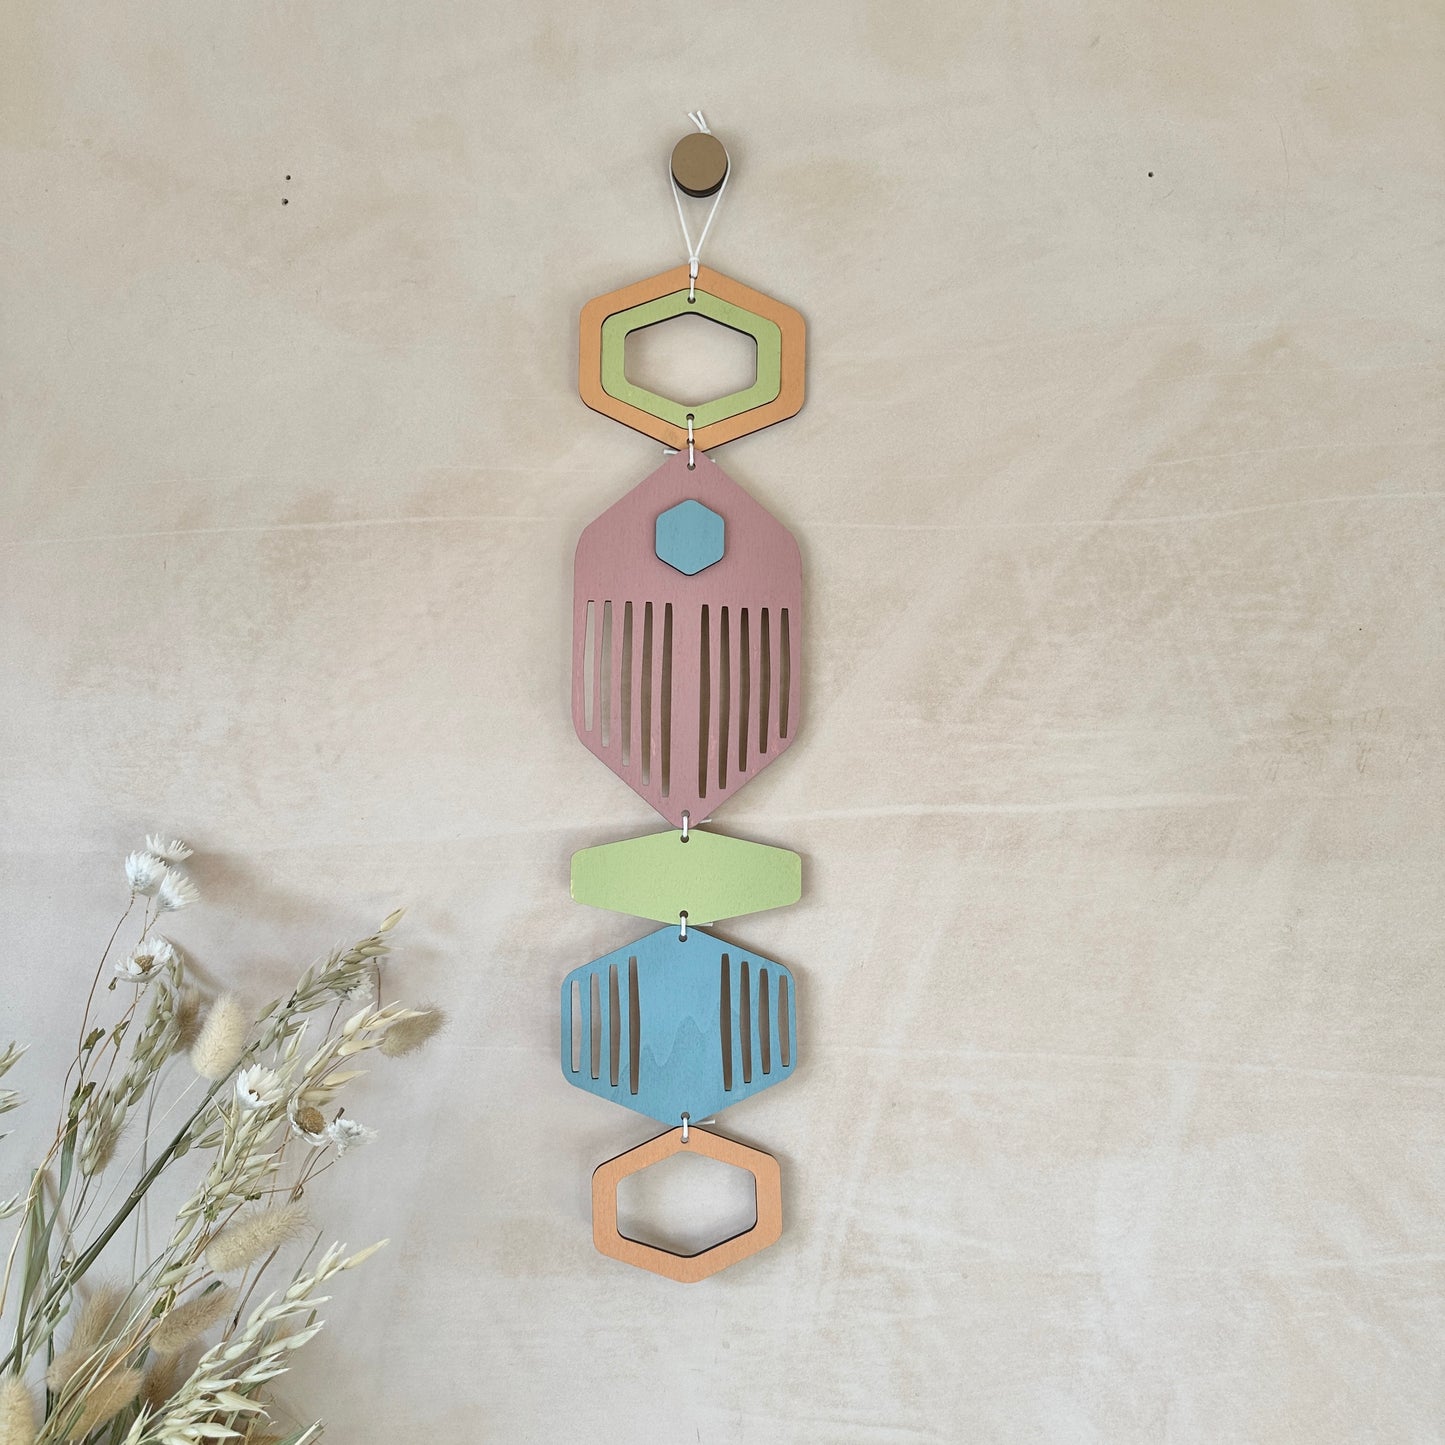 Hexagon Wall Hanging - Bright Wall Art - Hand Painted Art - Kids Bedroom Decor - Fun Home Decor Gift - Unique Wall Decor - New Home Gift